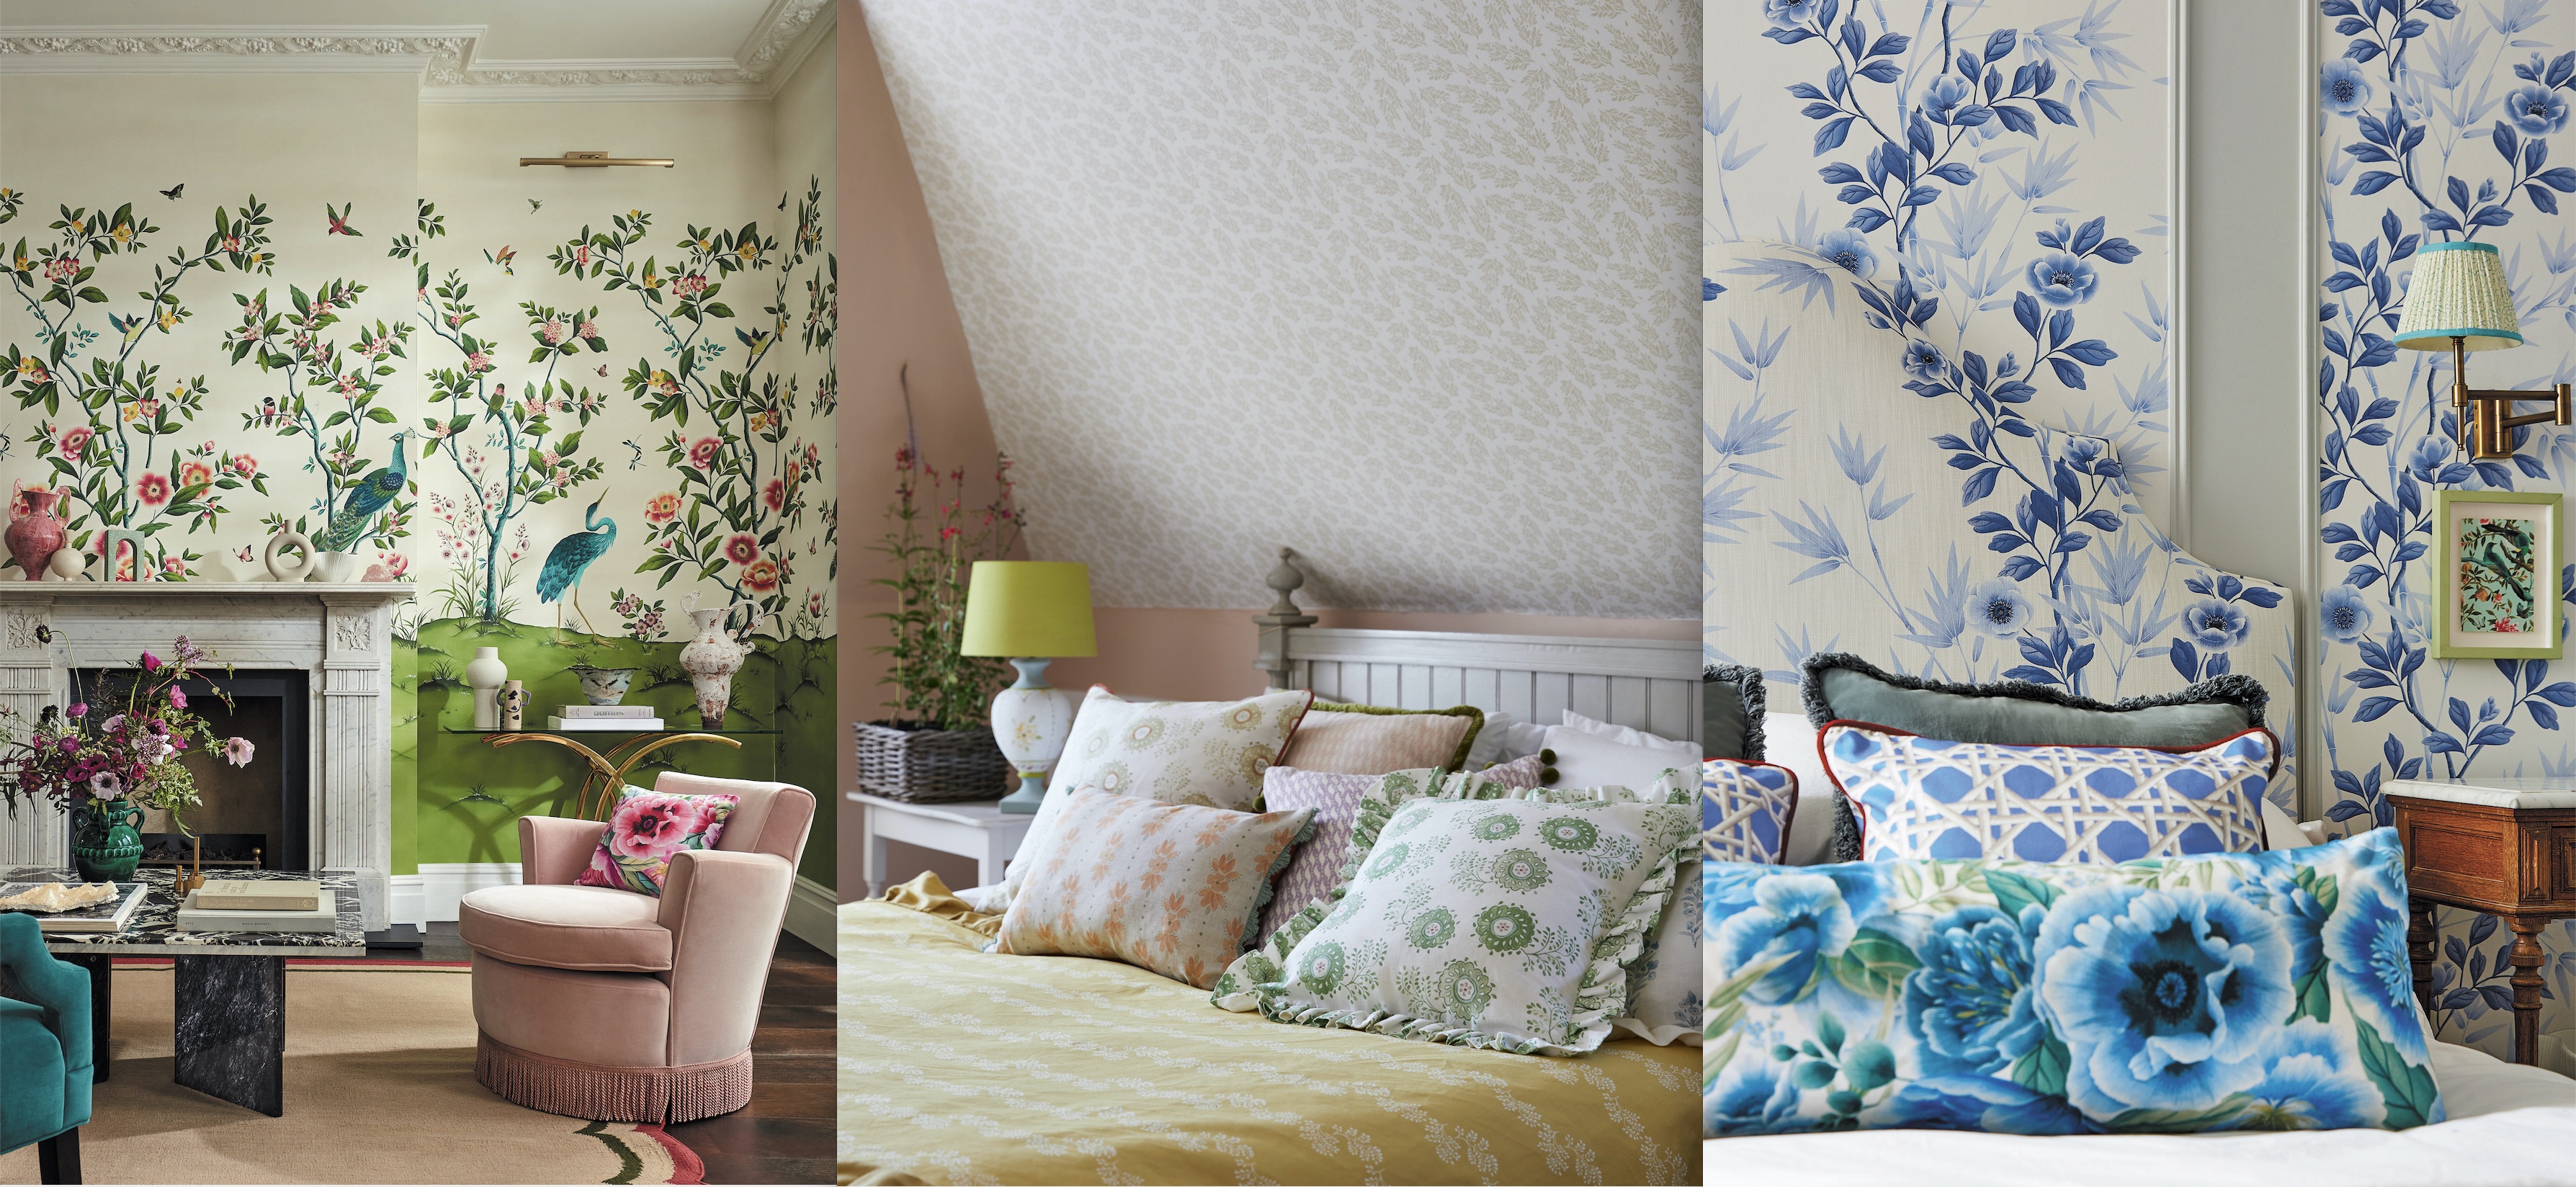 Country wallpaper ideas – for period properties and cottages | Homes &  Gardens |